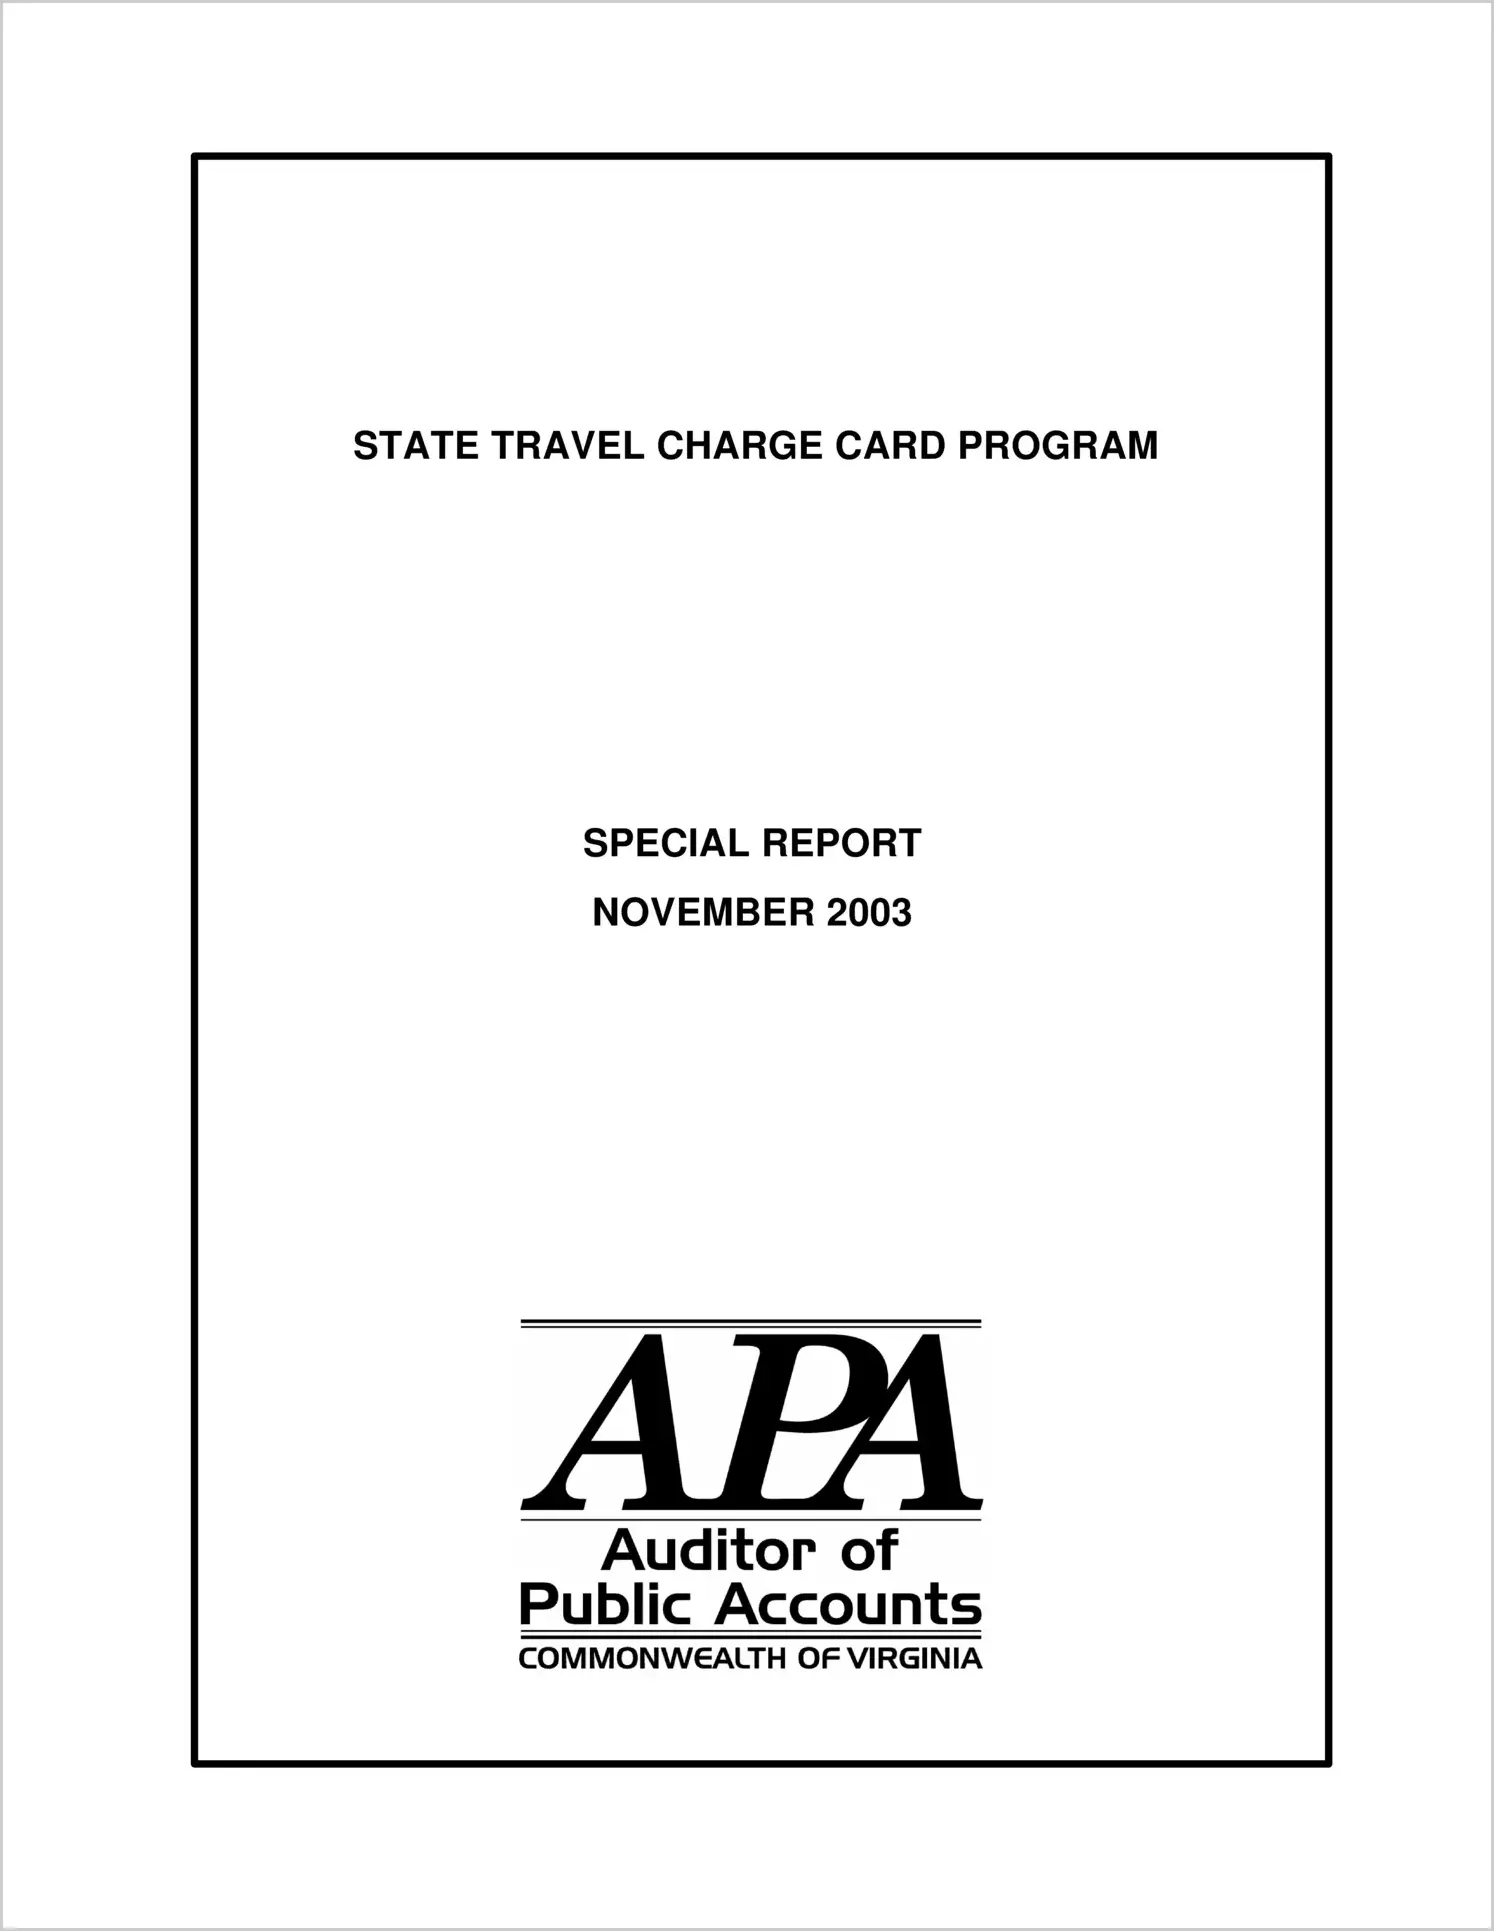 Special ReportState Travel Charge Card Program(Report Date: 12/4/2003)